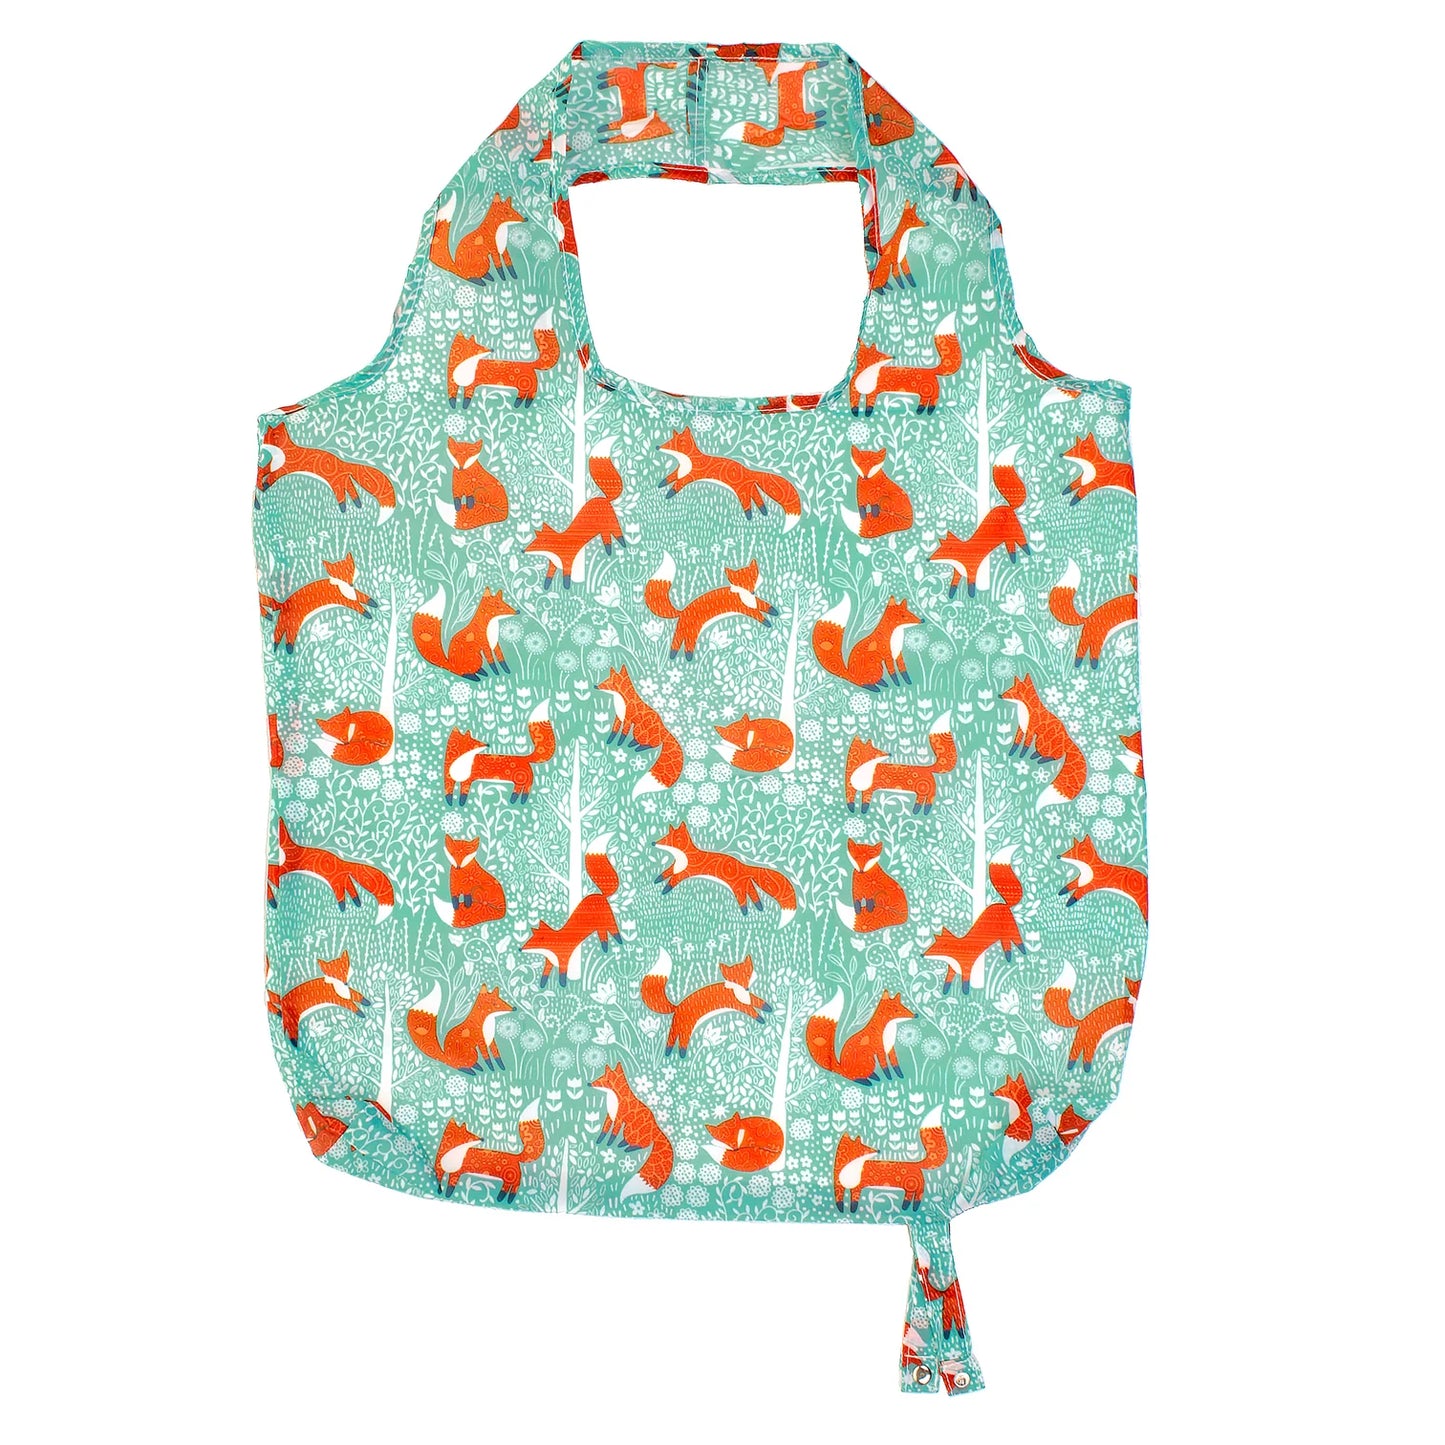 Roll-Up Bag "Foraging Fox"